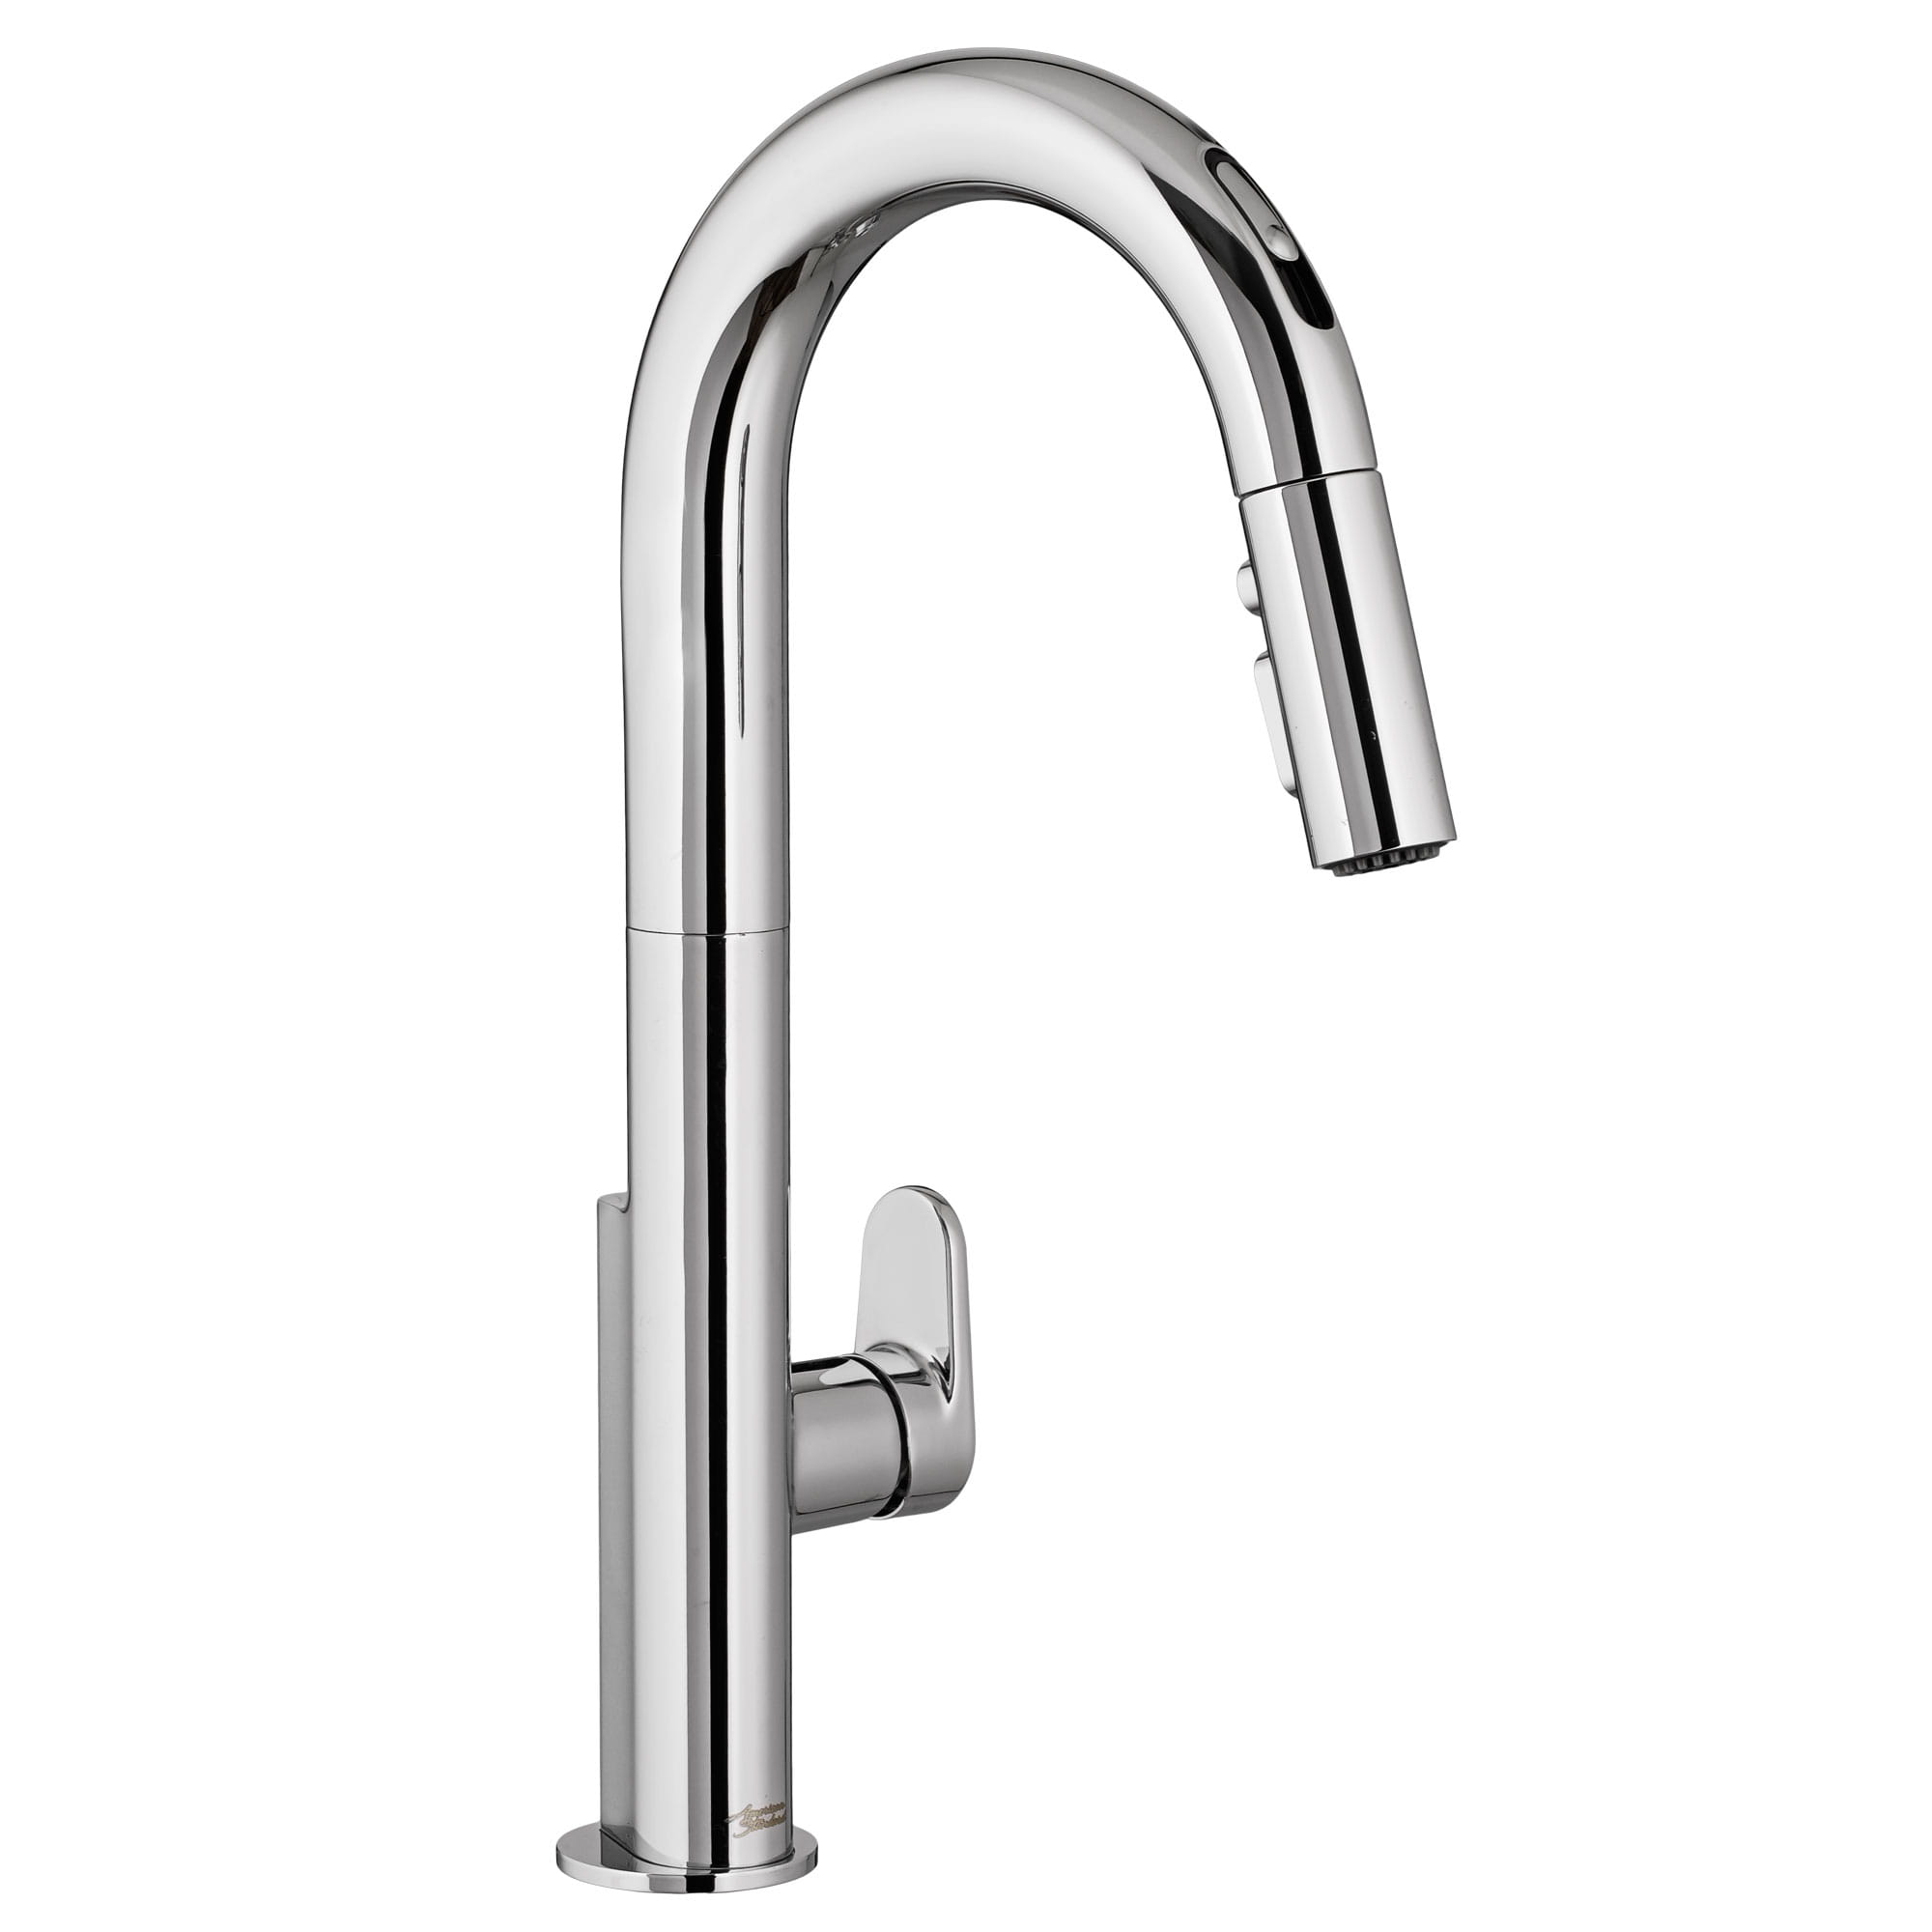 Beale® Touchless Single-Handle Pull-Down Dual Spray Kitchen Faucet 1.5 gpm/5.7 L/min